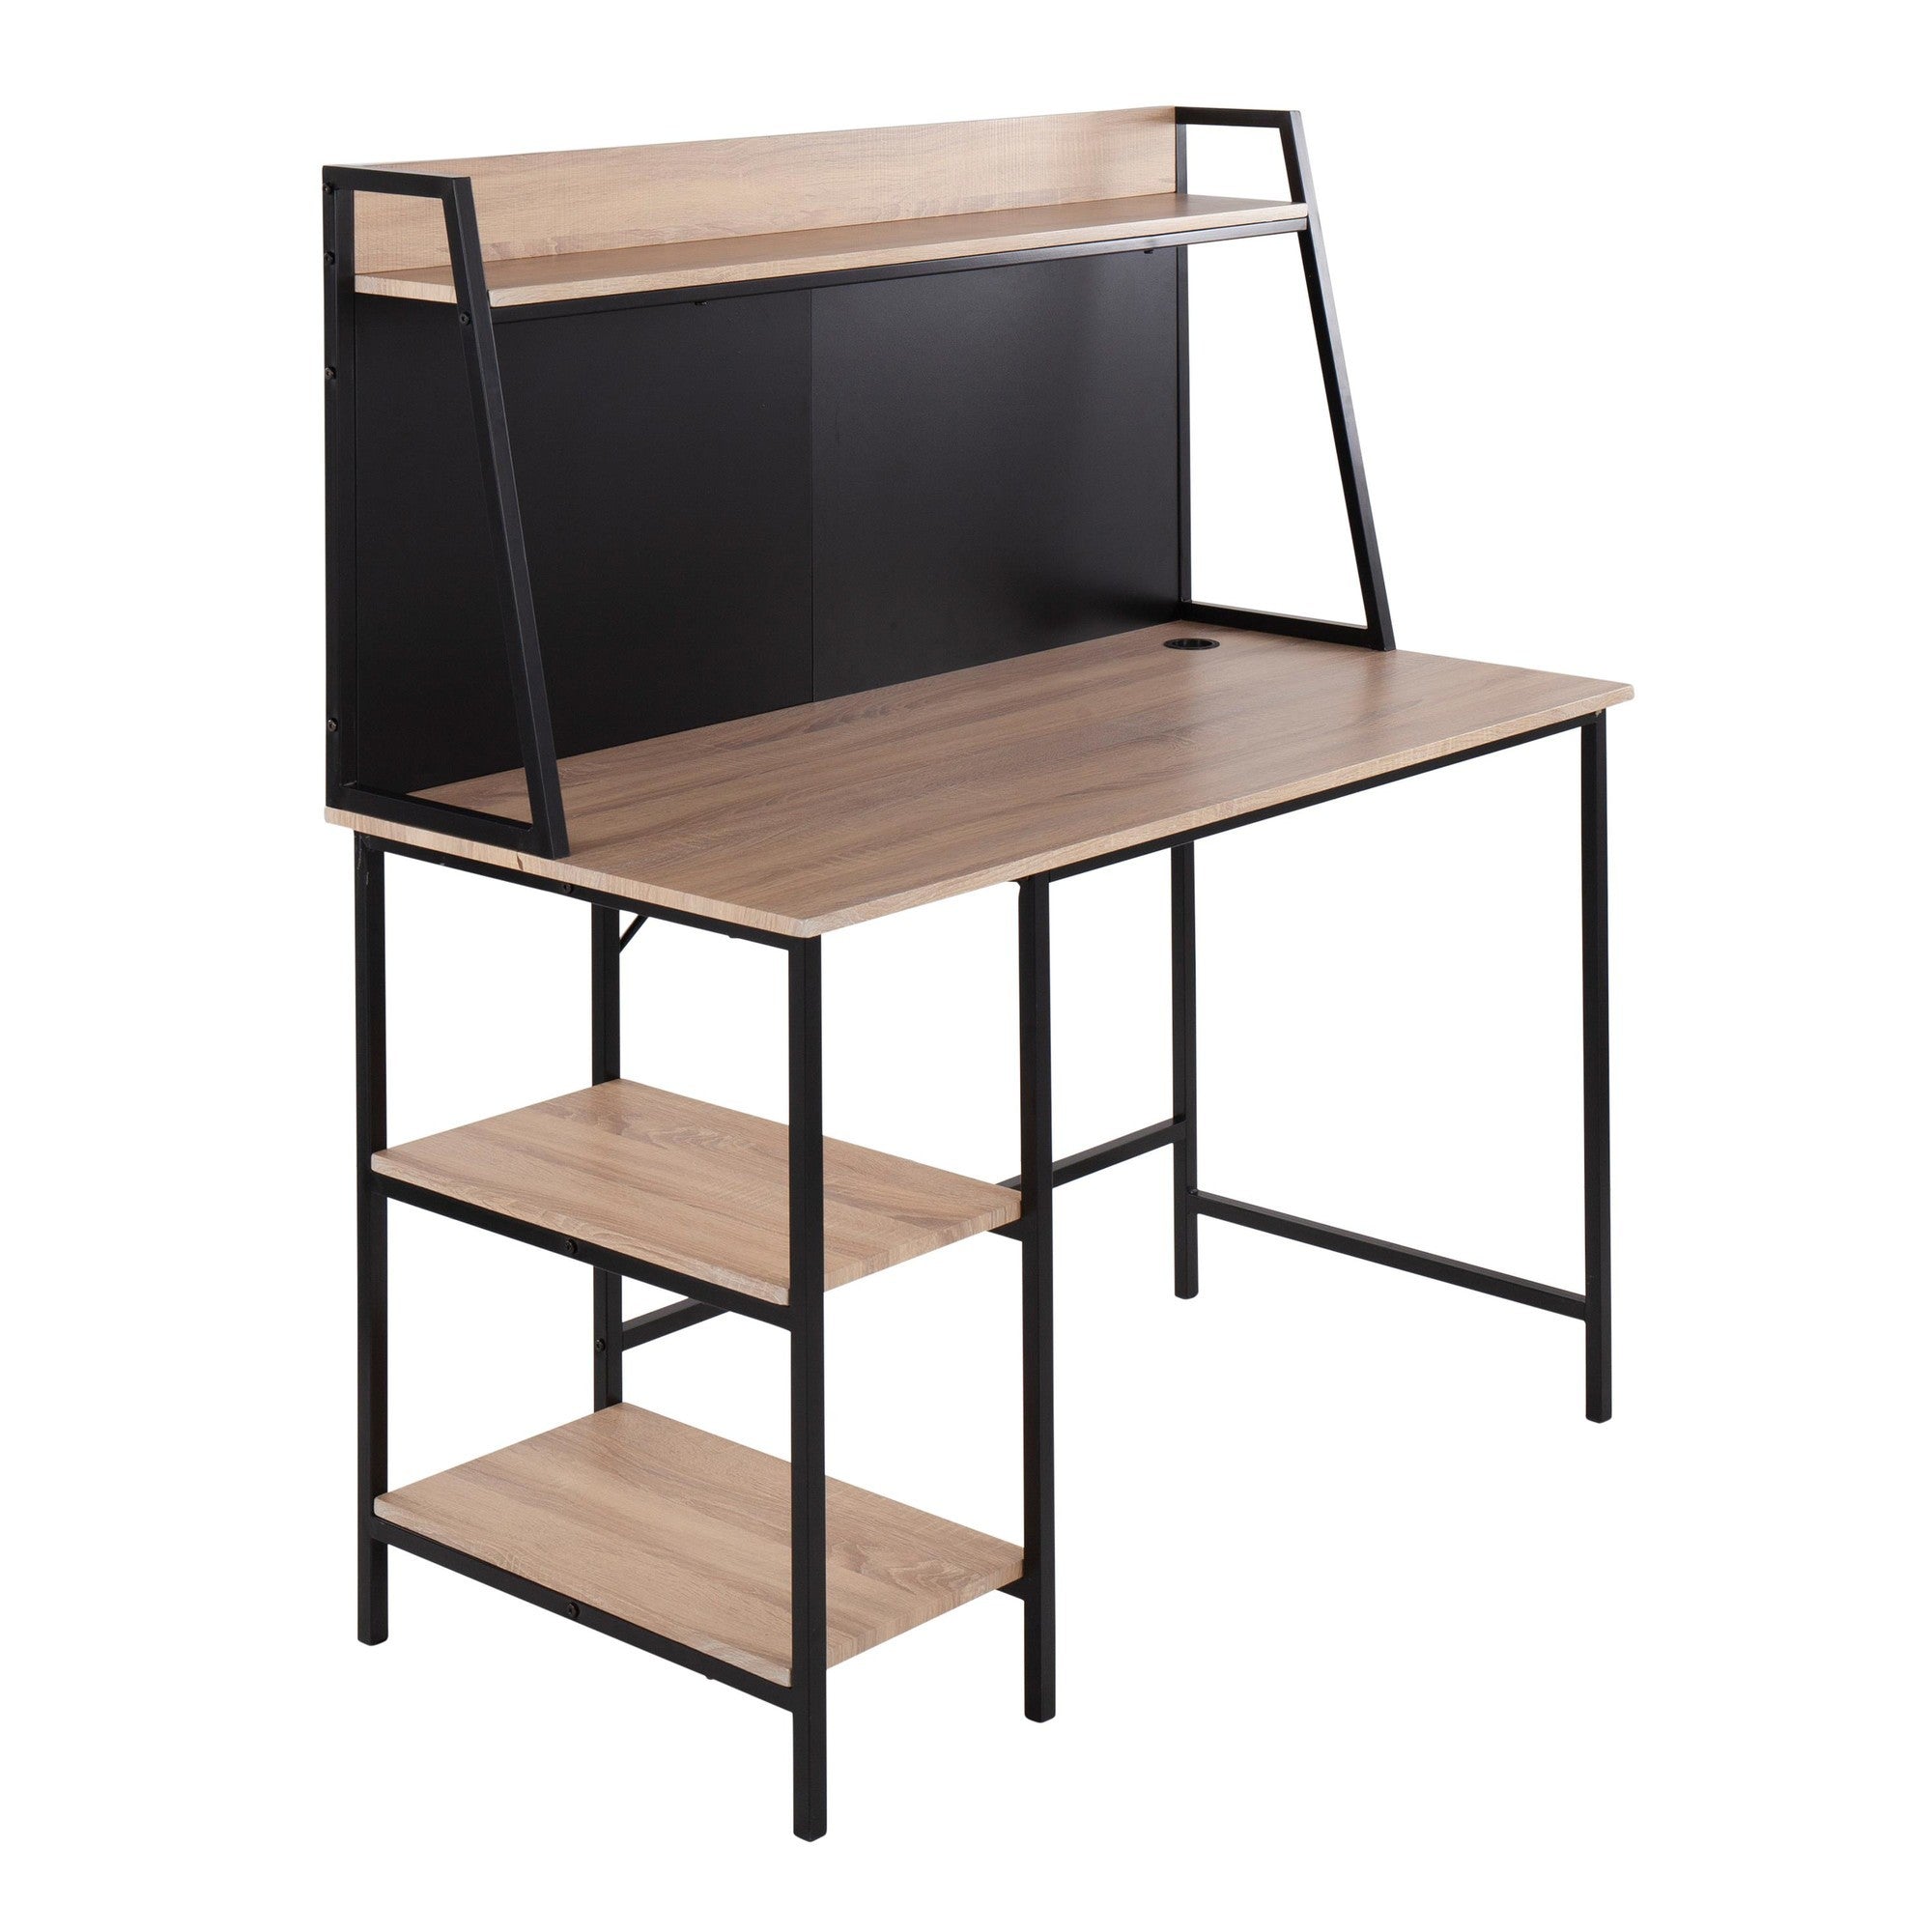 Geo Shelf Contemporary Desk in Black Steel and Natural natural-mdf